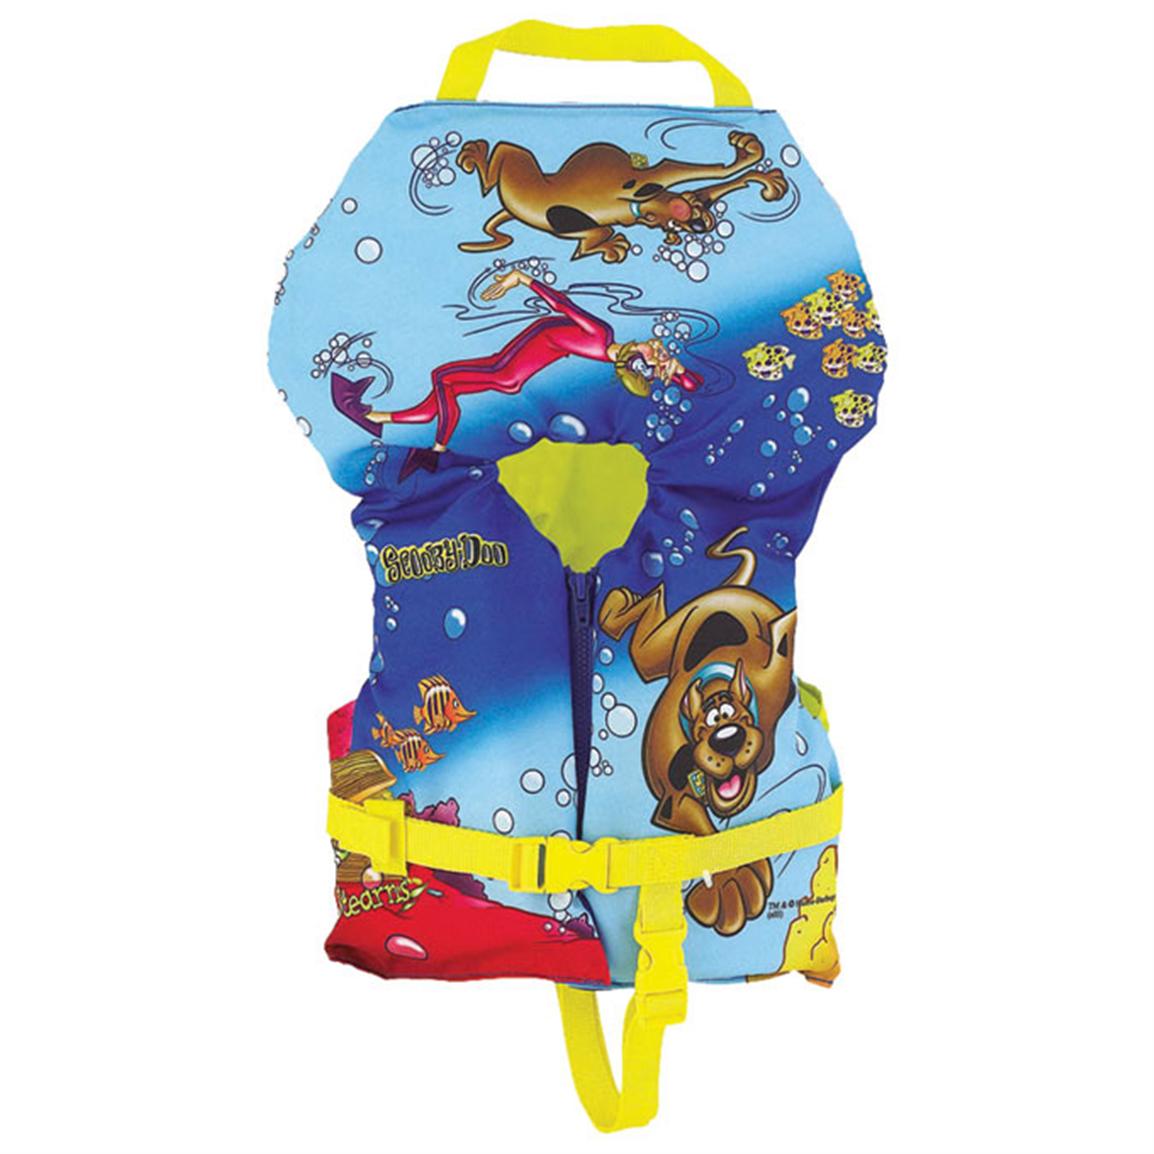 Details about   SCOOBY DOO Life Jacket Ski Vest Sterns CHILD 30-50 Lbs 20"-25" Chest Boat Safety 